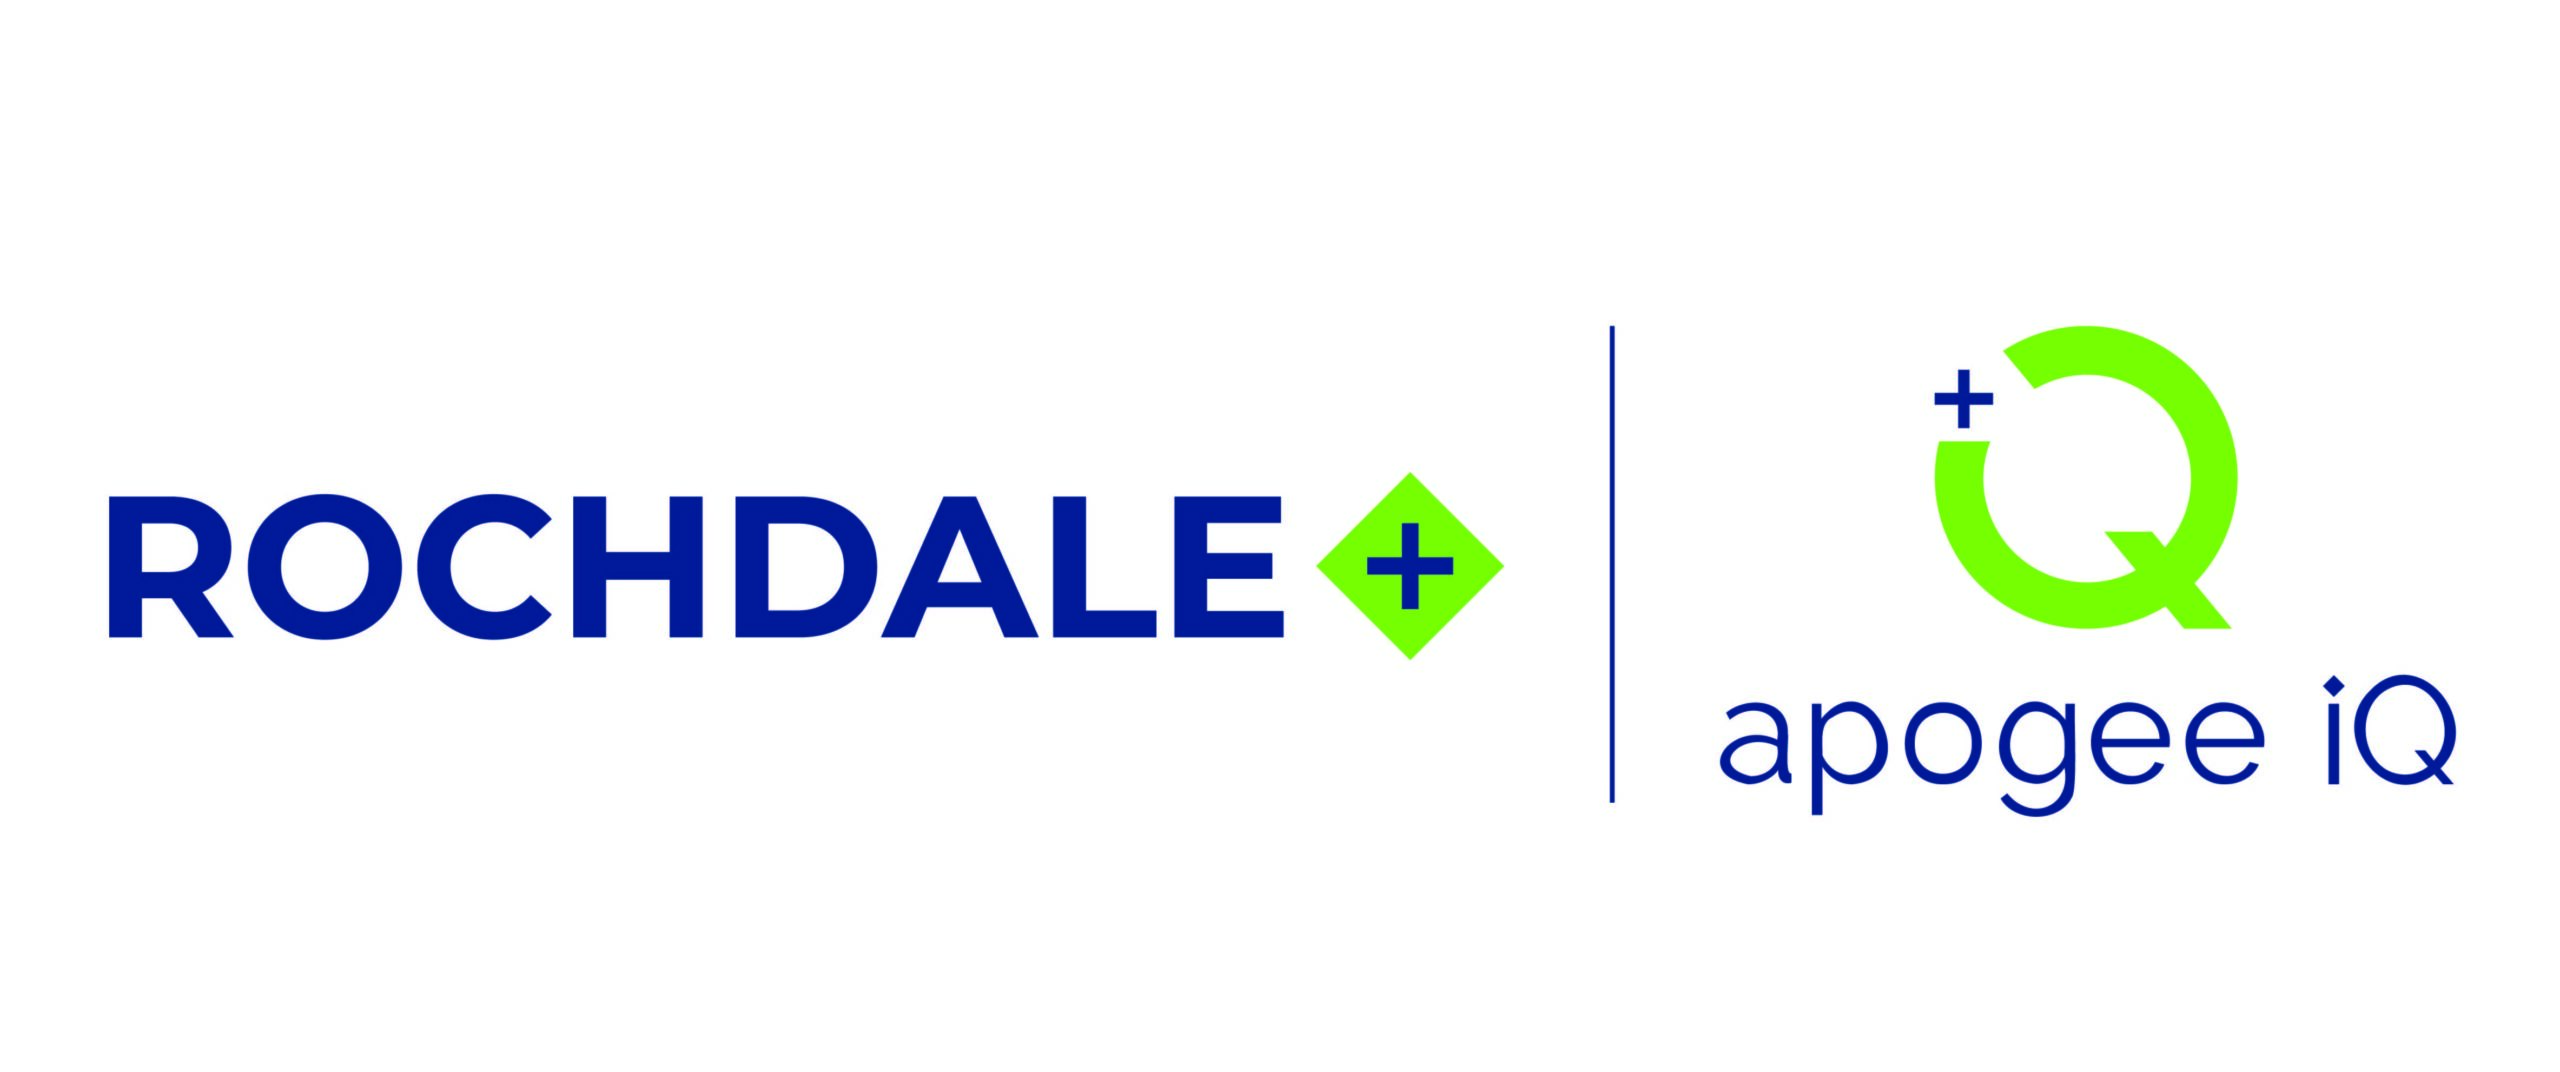 Rochdale continues to expand risk management capabilities with addition of Strategy, Risk and Assurance Partner and apogee iQ software developer